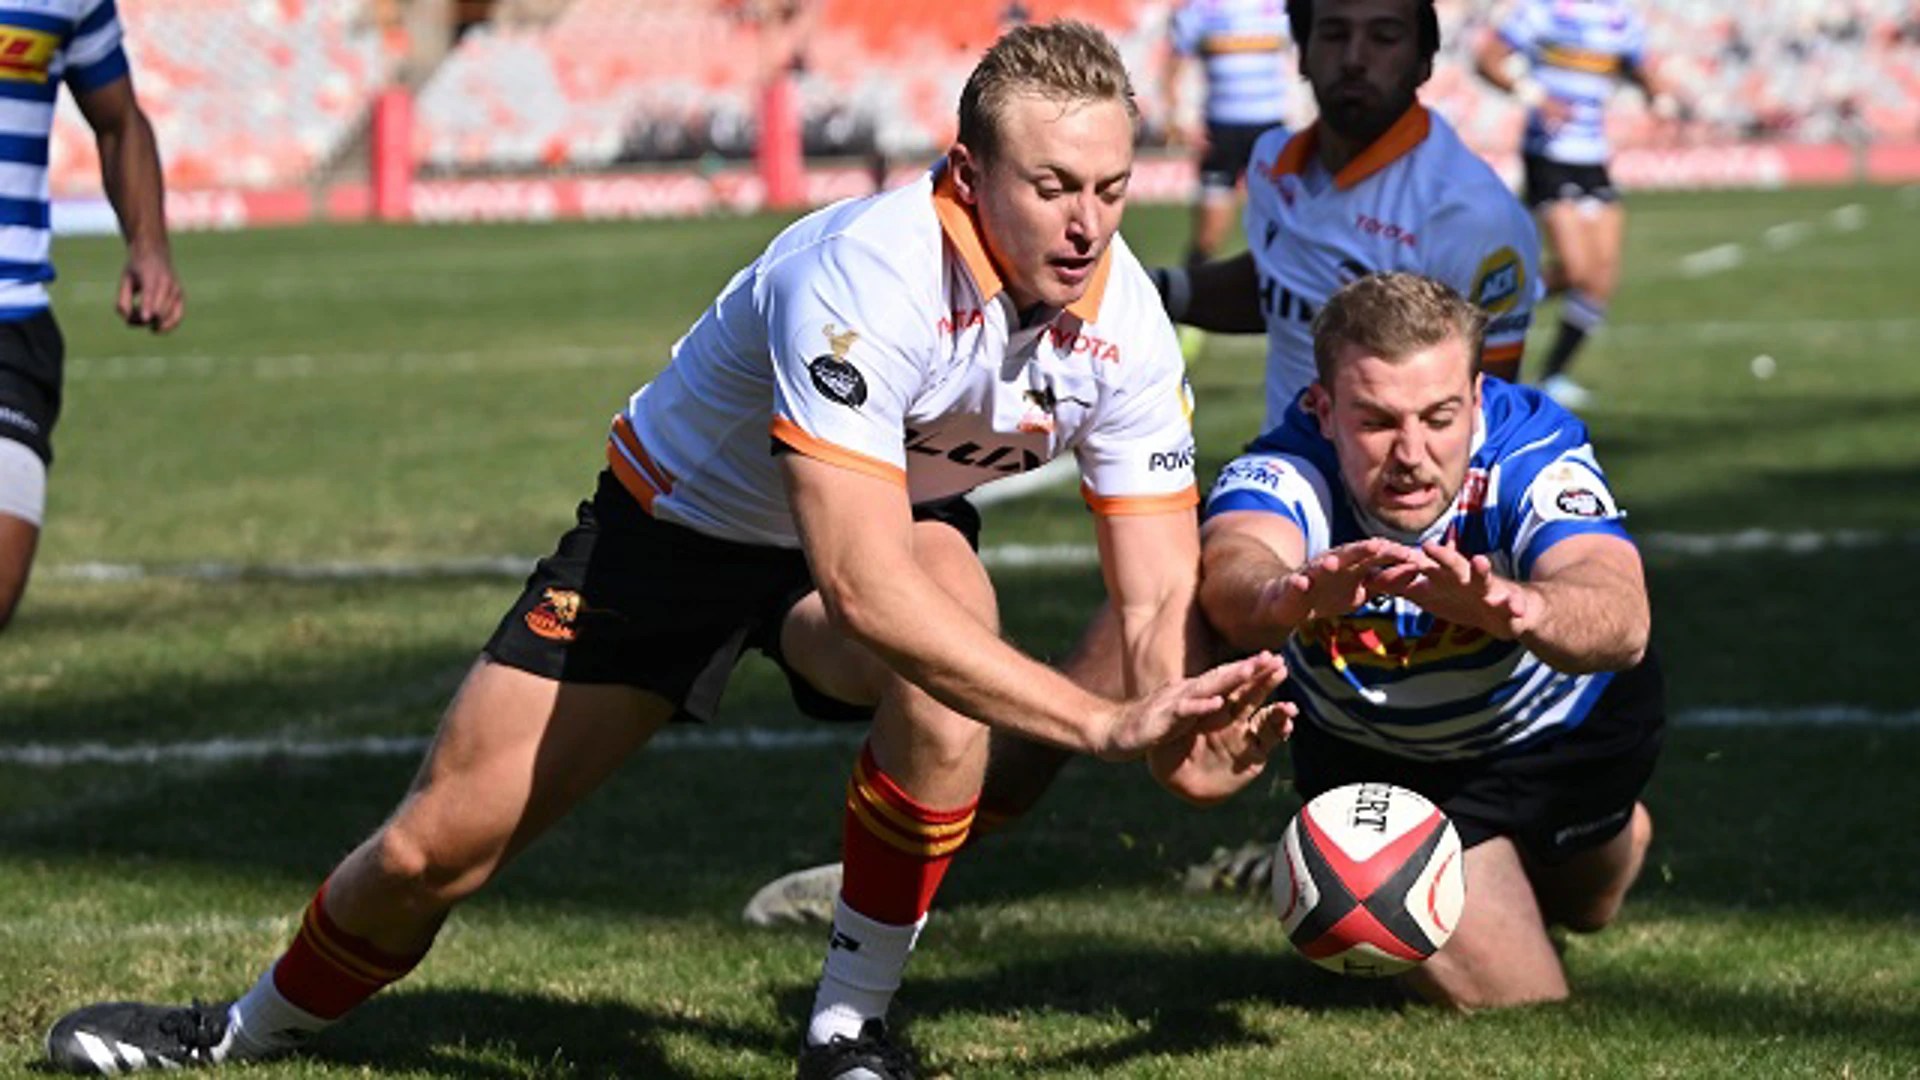 Toyota Cheetahs v DHL Western Province | Match Highlights | Currie Cup Premier Division